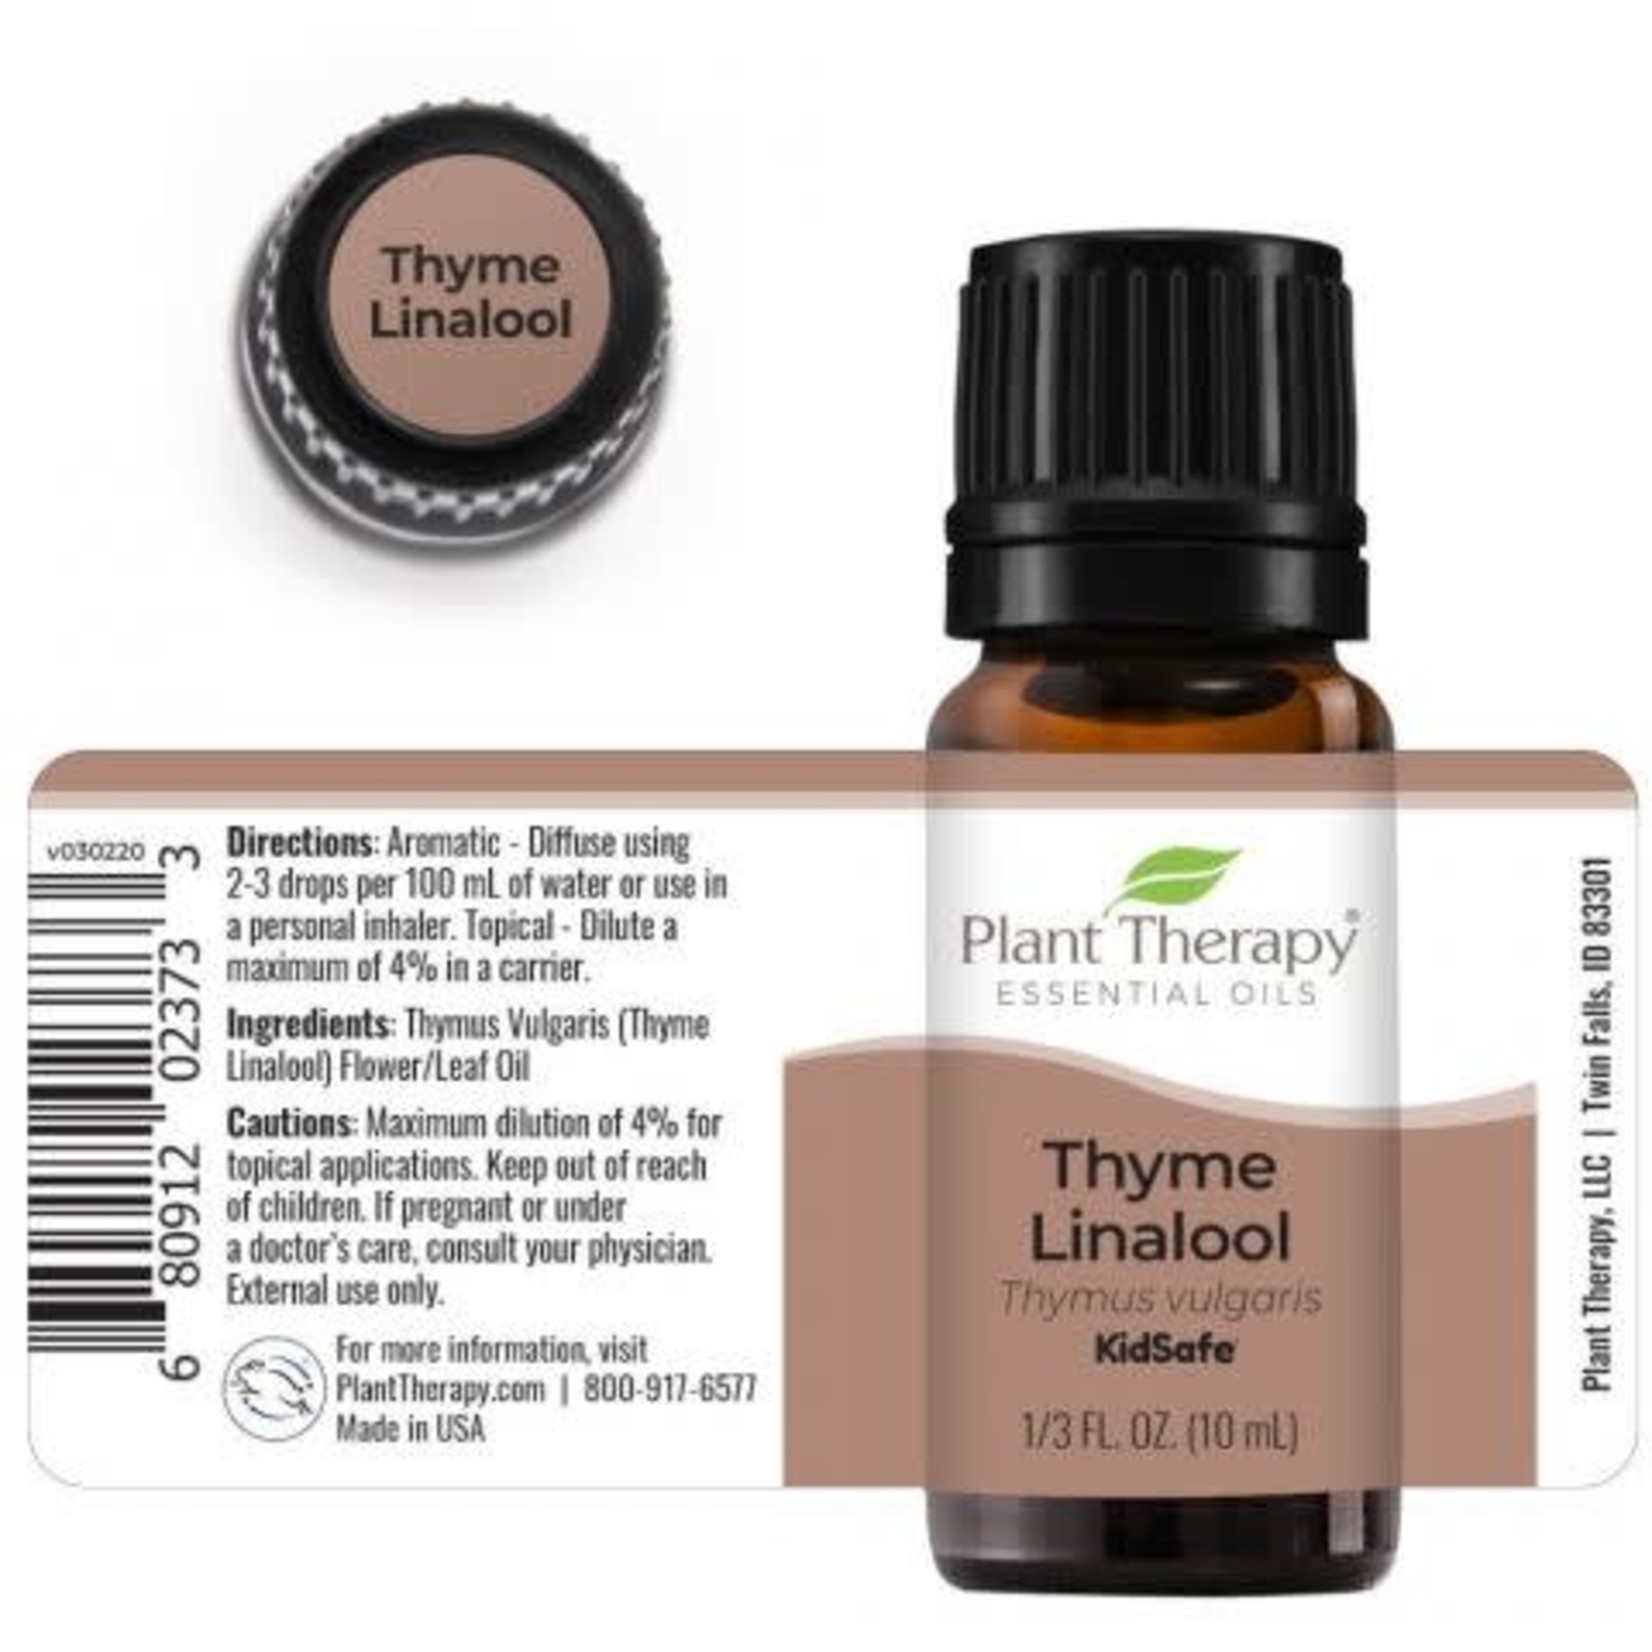 Plant Therapy PT Thyme Linalool Essential Oil 10ml